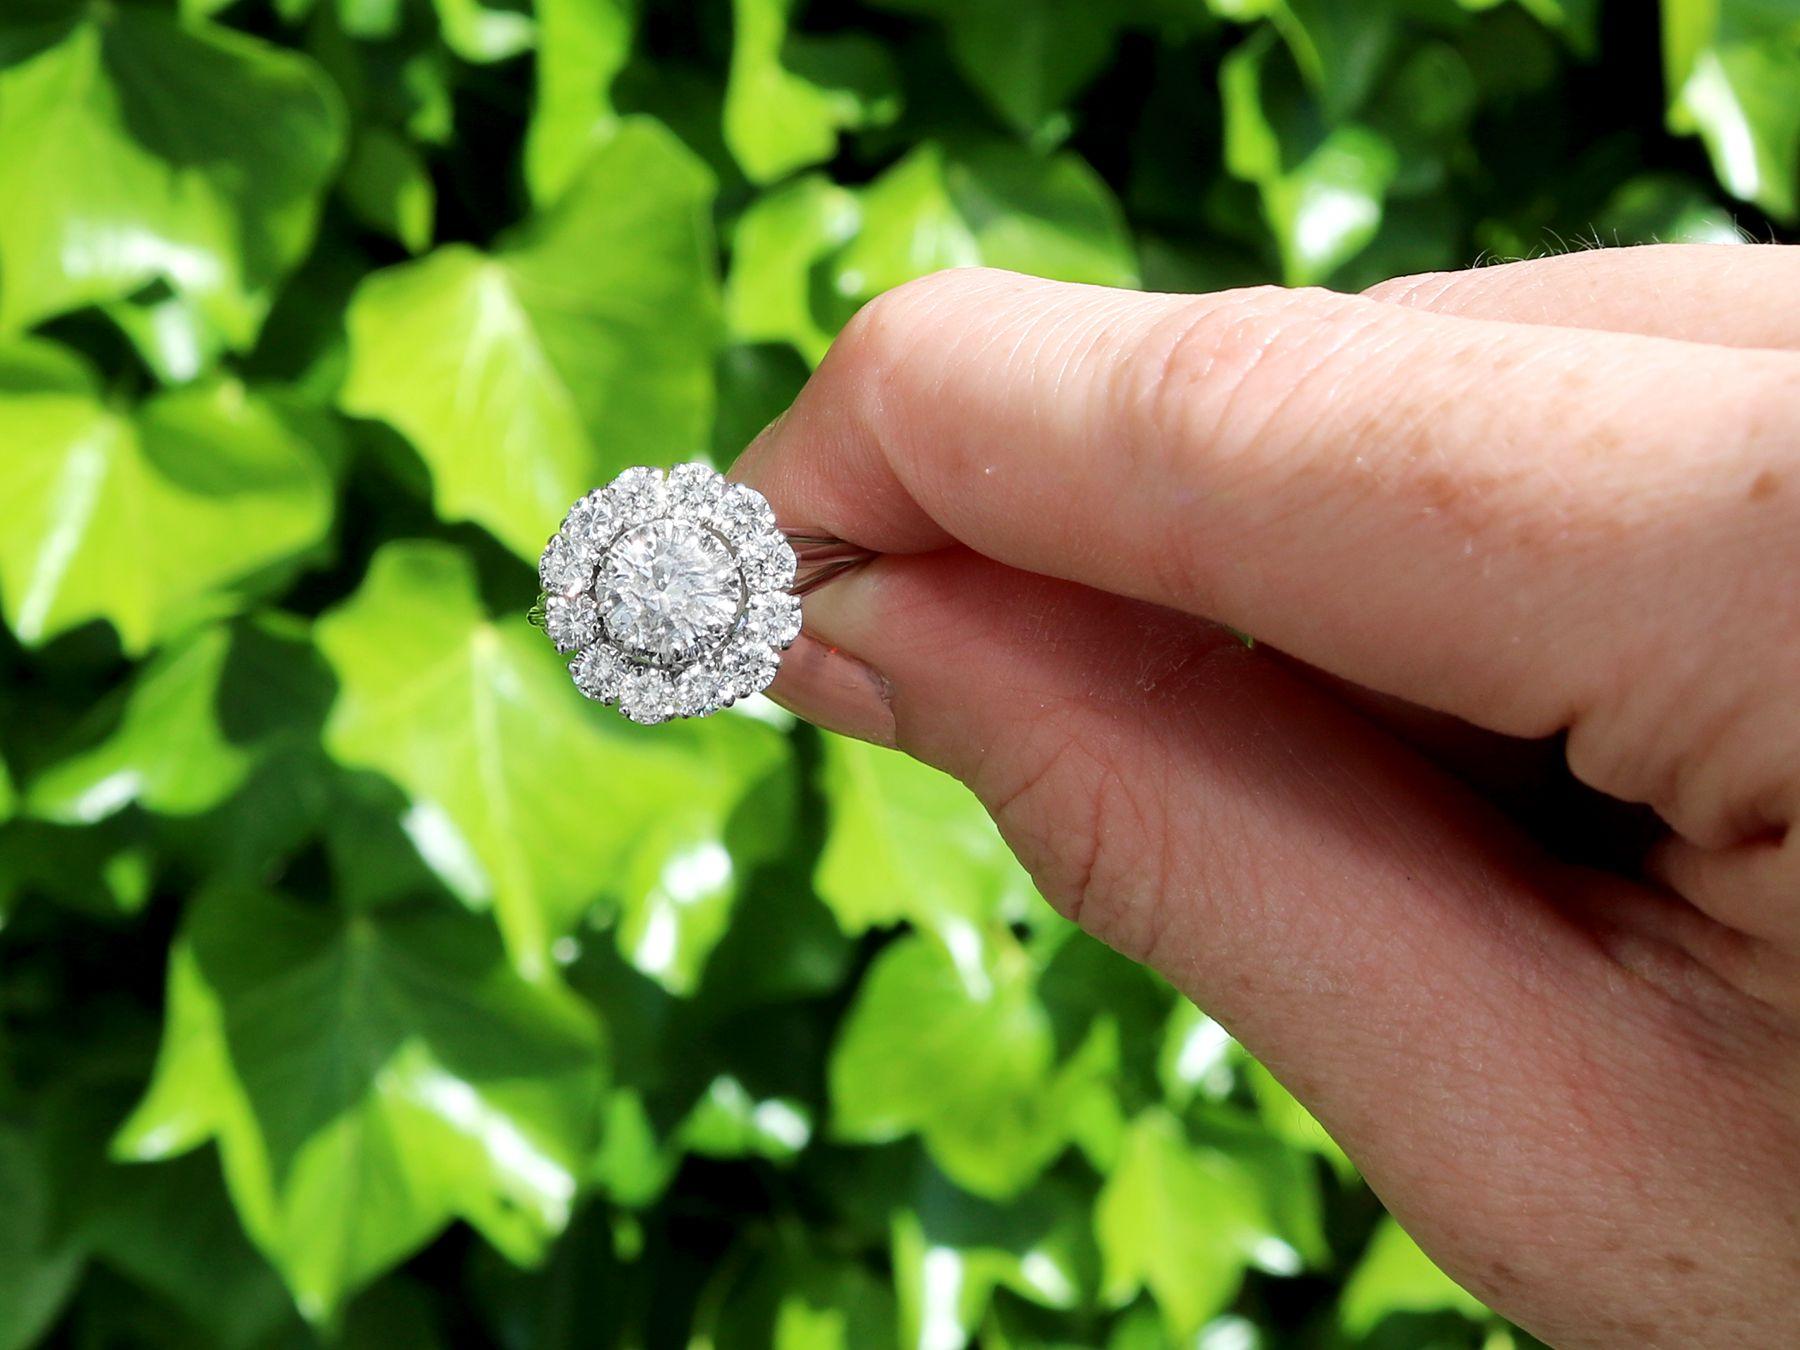 A stunning, fine and impressive 1.66 carat diamond and 18 karat white gold, platinum set cluster ring; part of our diverse diamond jewellery and estate jewelry collections.

This stunning, fine and impressive vintage diamond ring has been crafted in